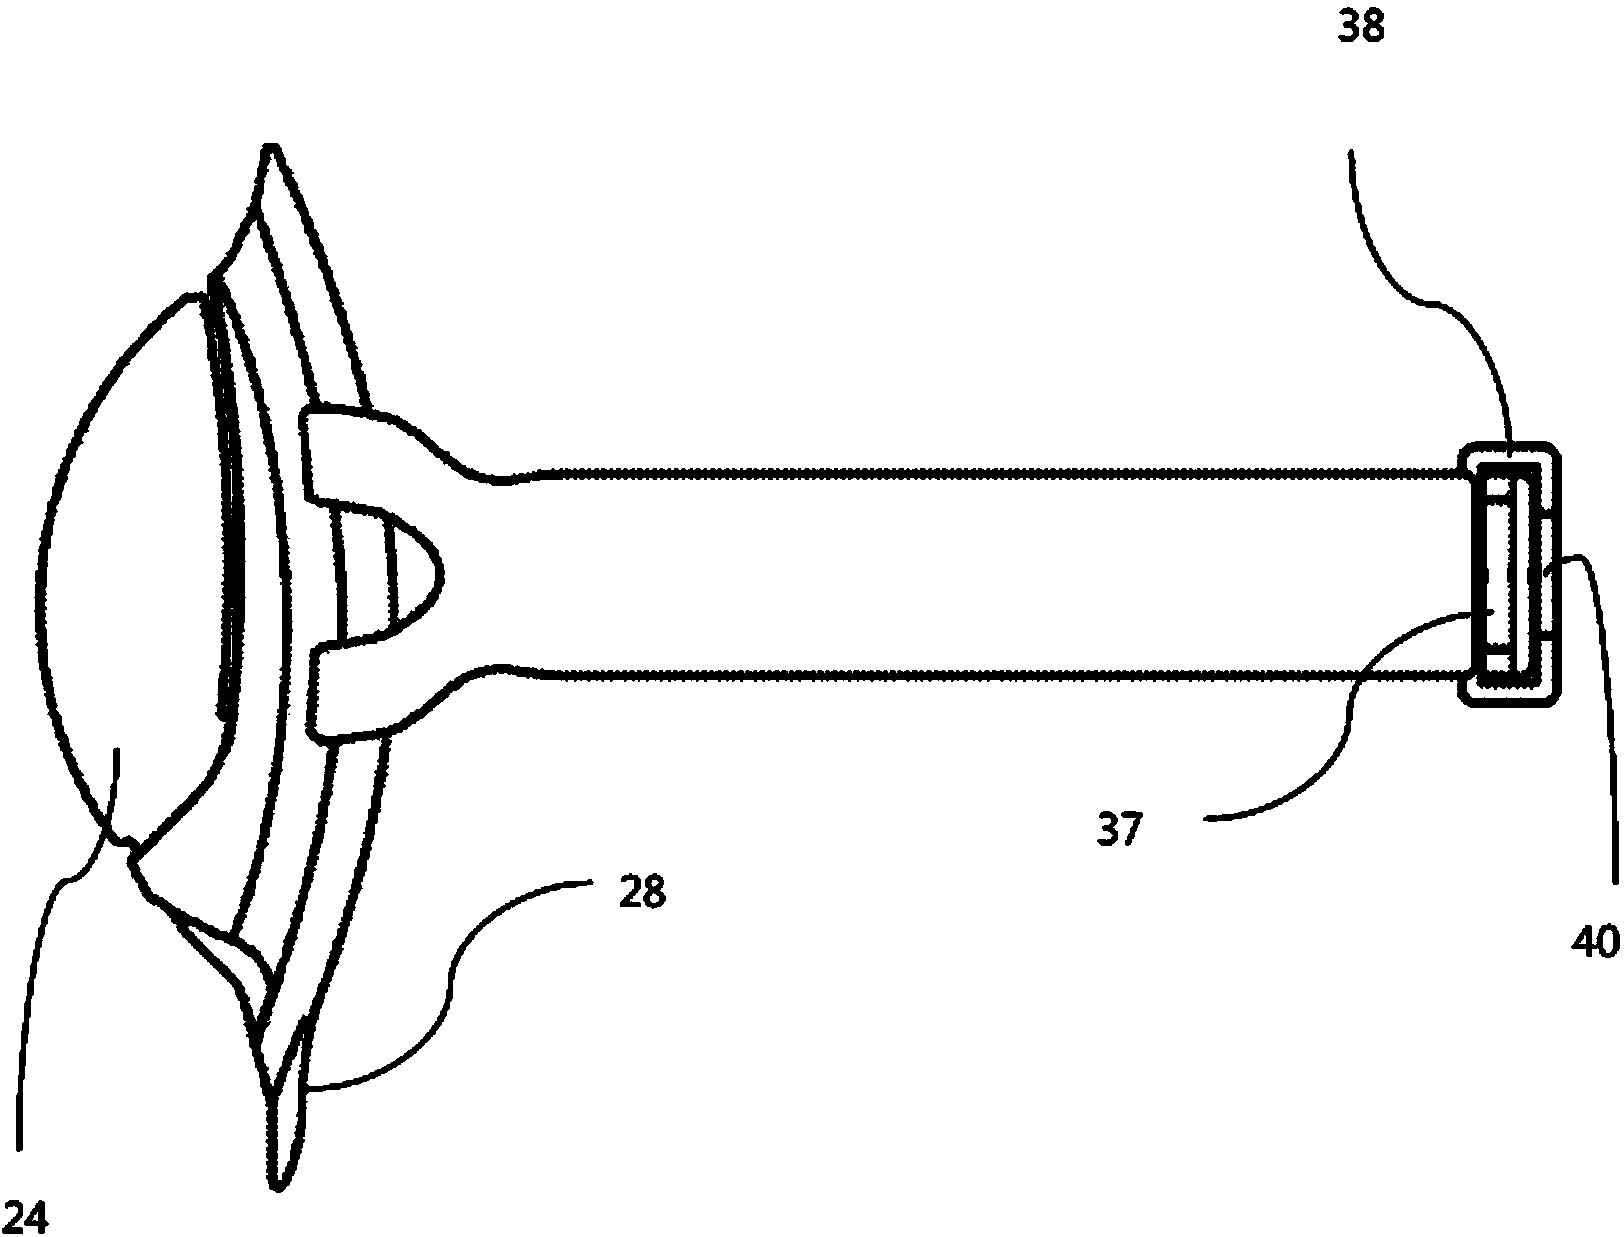 Device for facilitating intravenous needle insertion or cannulation with vacuum generation means and tourniquet fastener